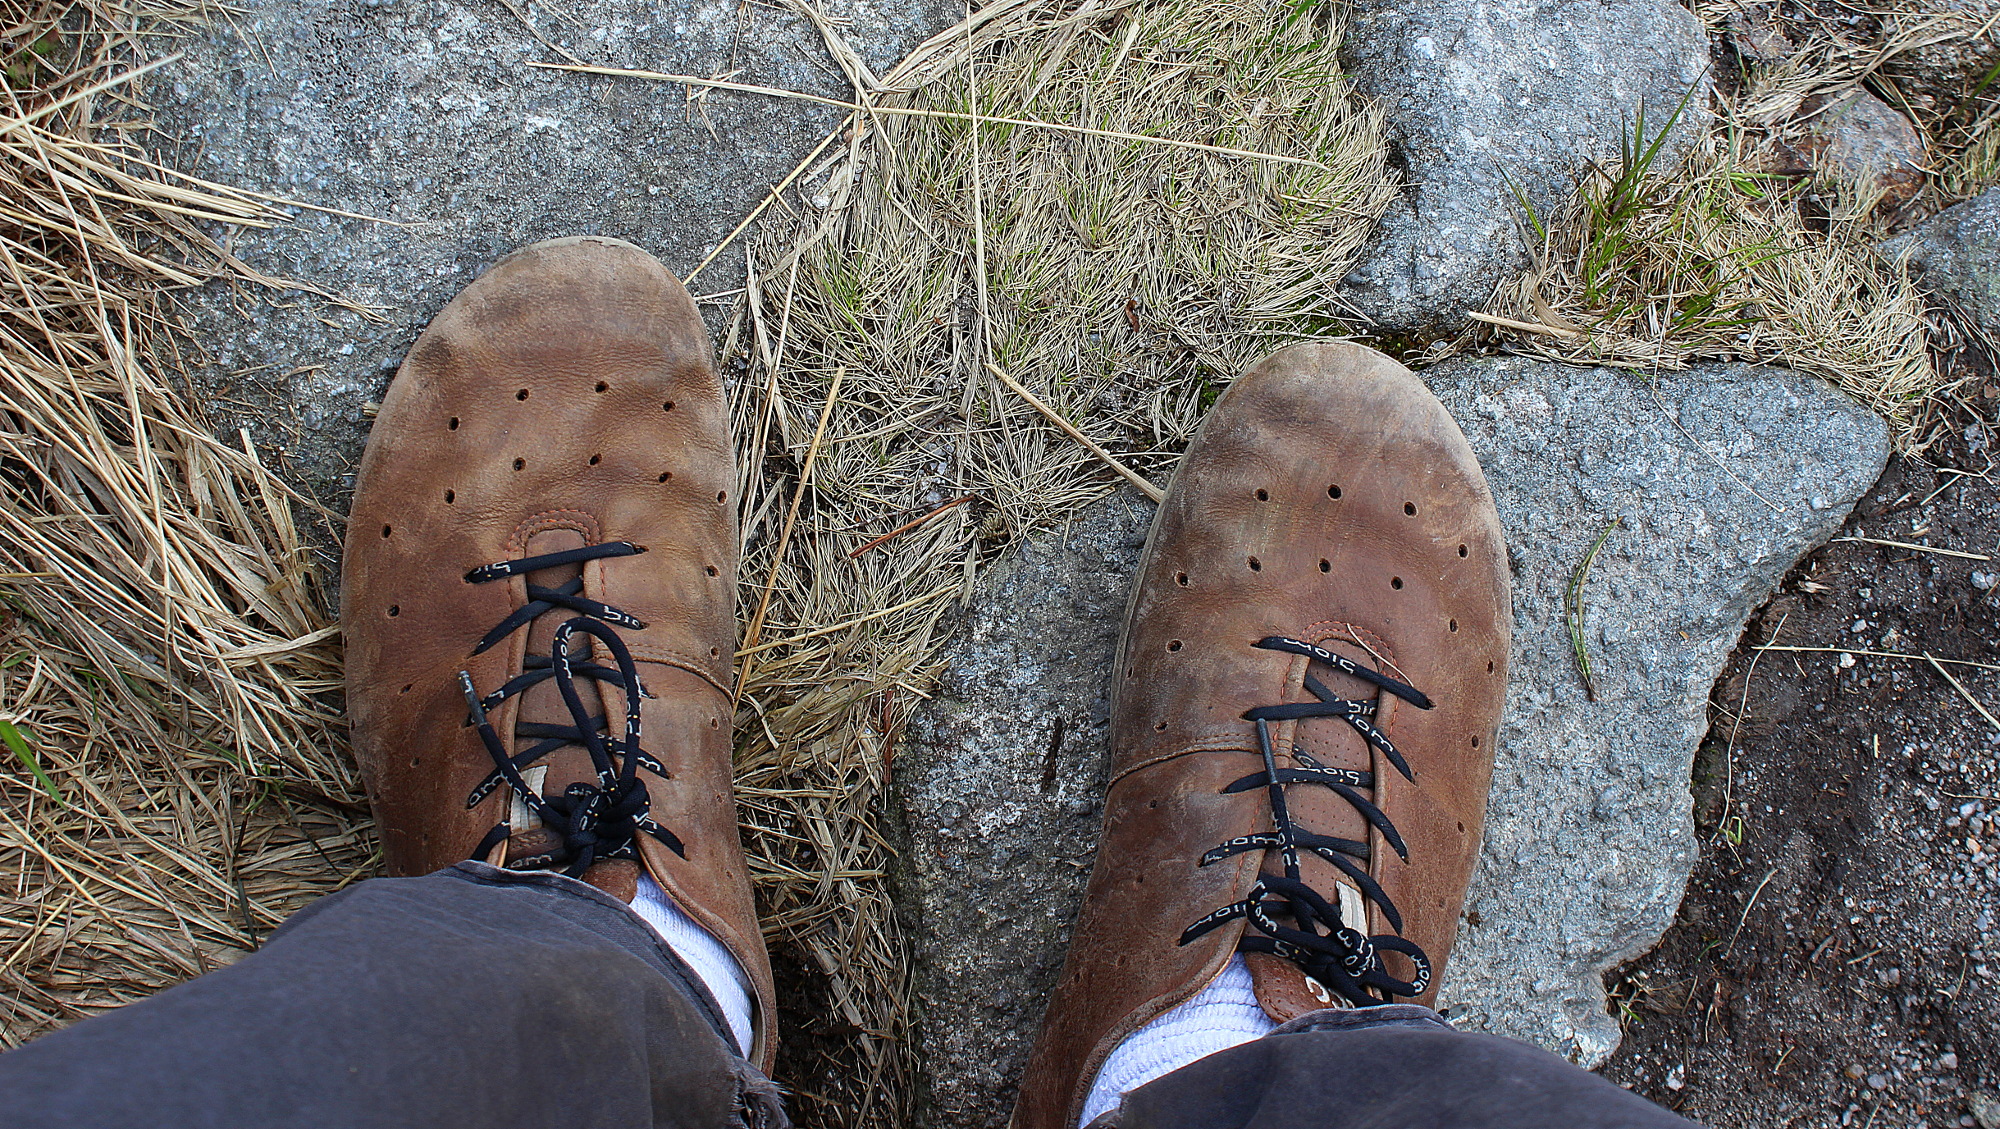 Amateur hiking tips for day hiking. Worn Ecco Biom leather shoes on rock.